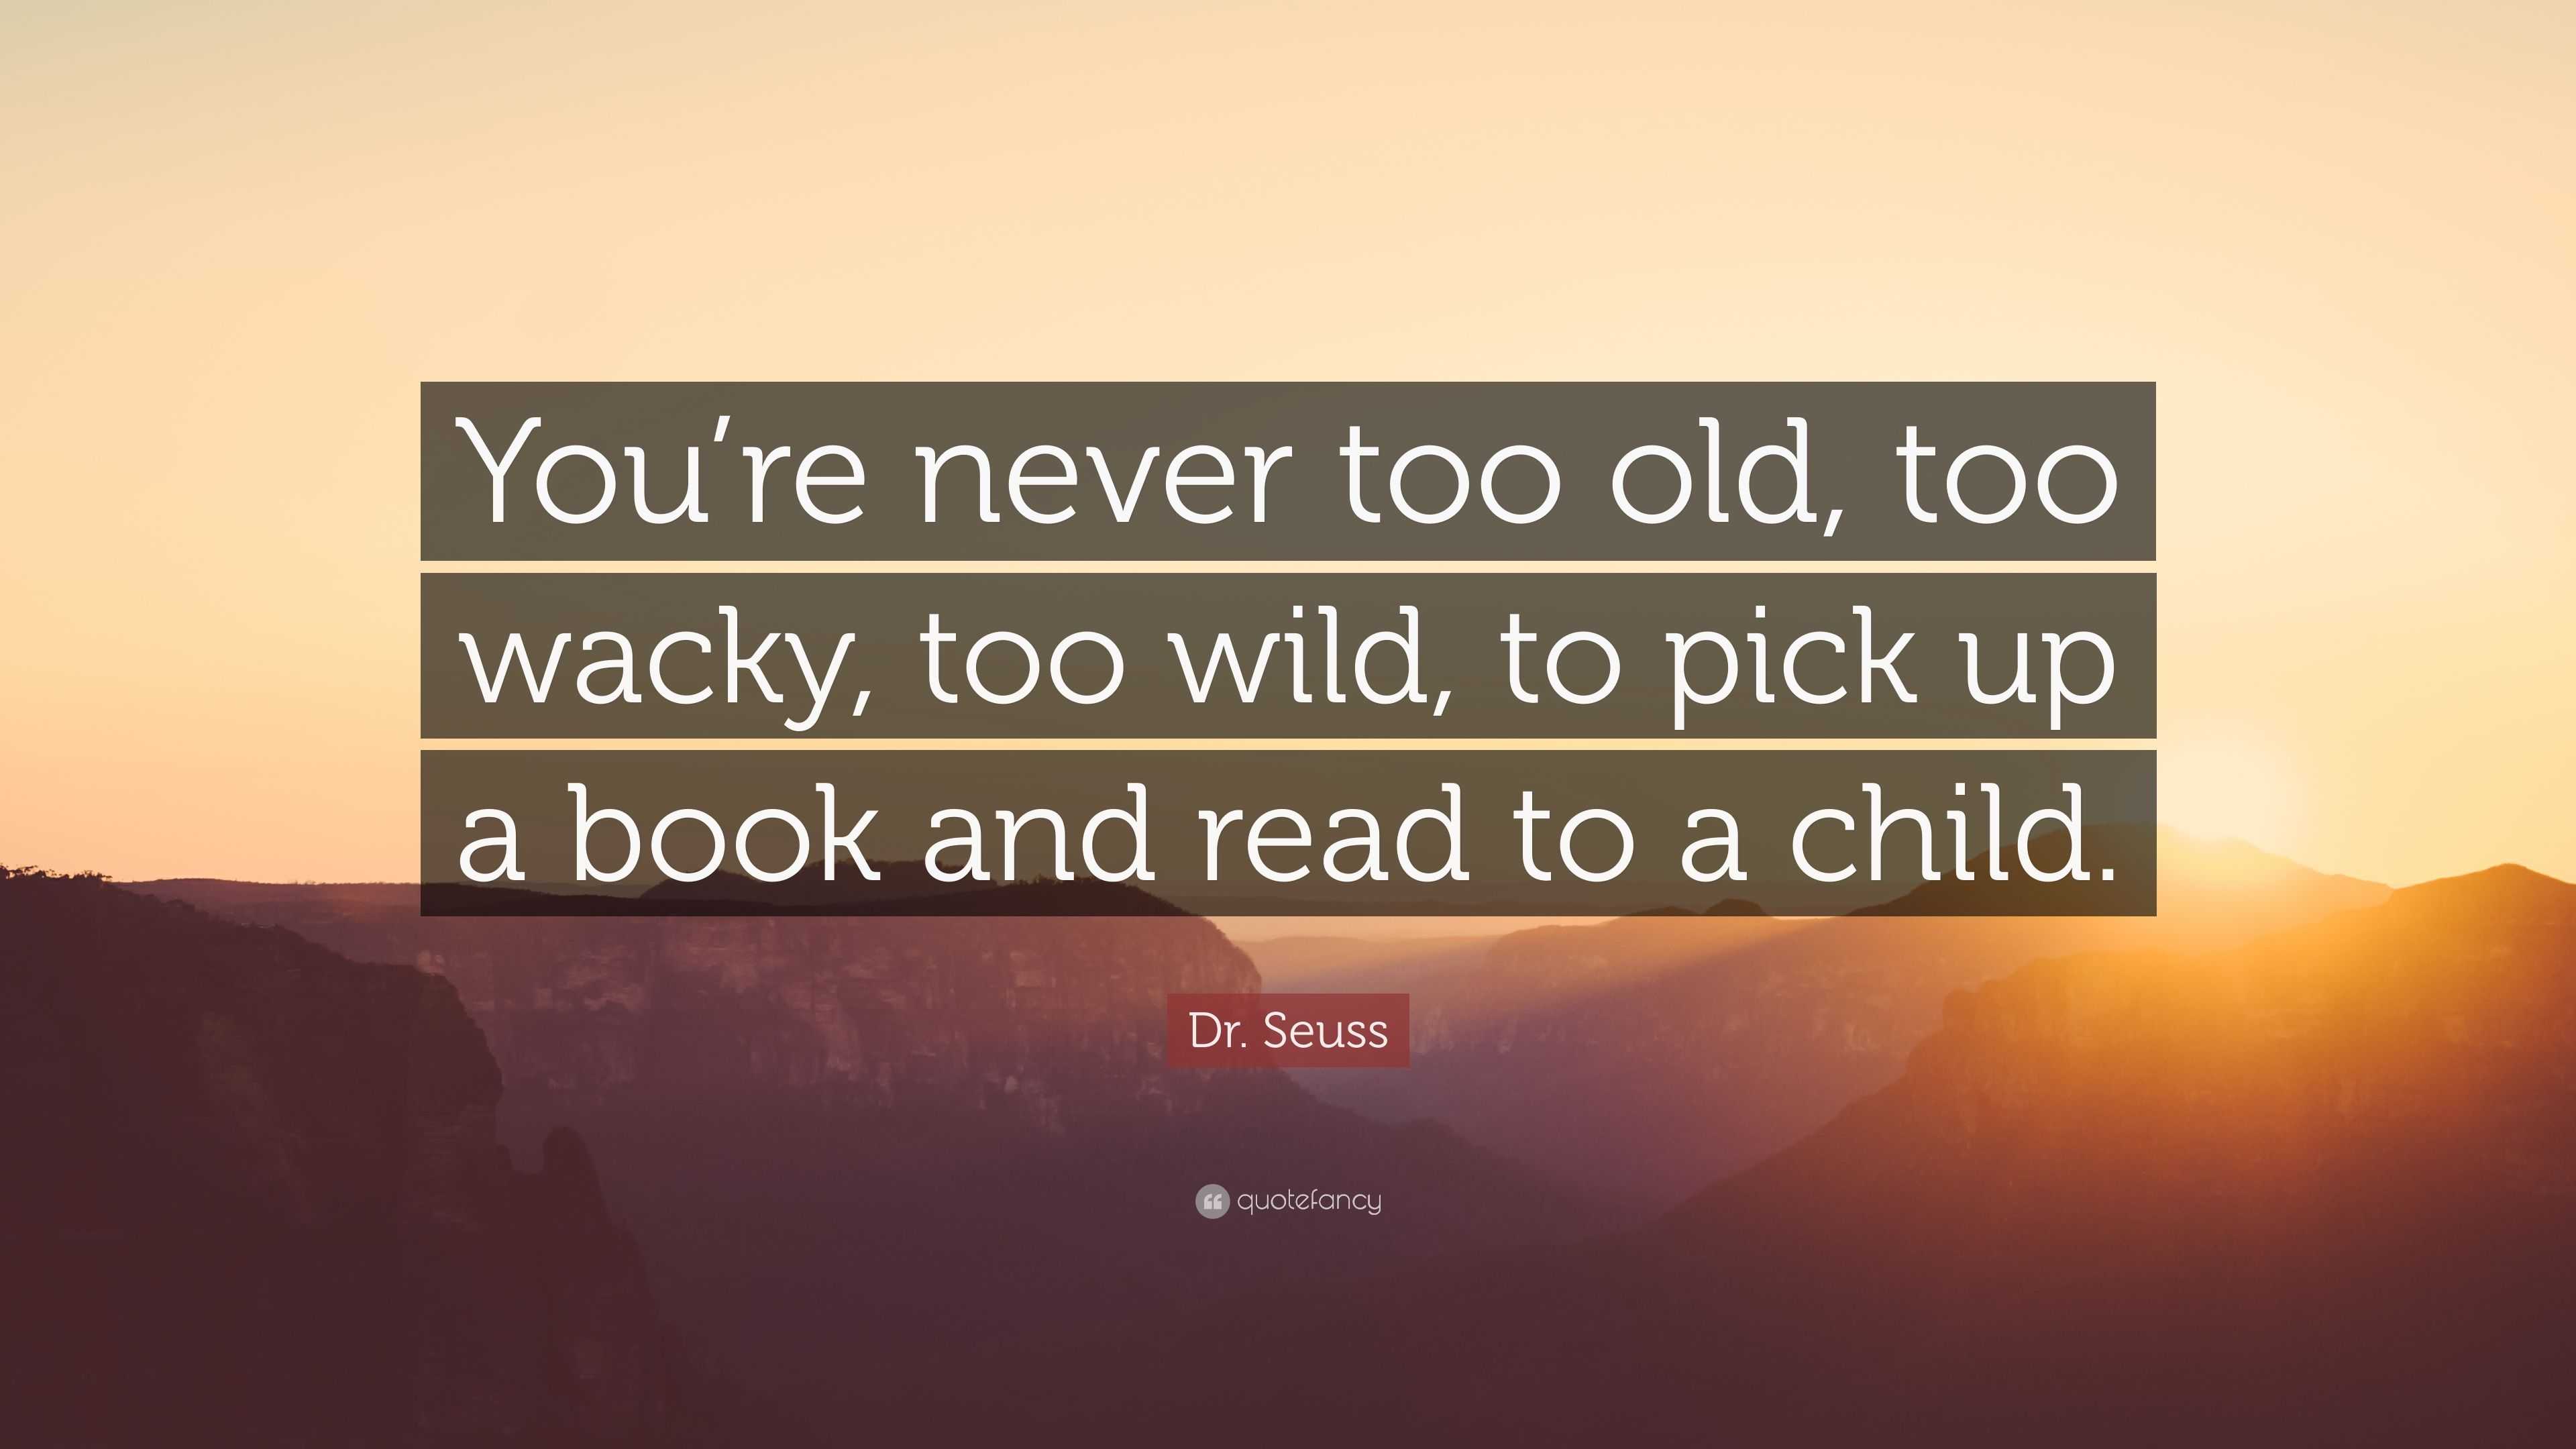 Dr. Seuss Quote: “You’re never too old, too wacky, too wild, to pick up ...